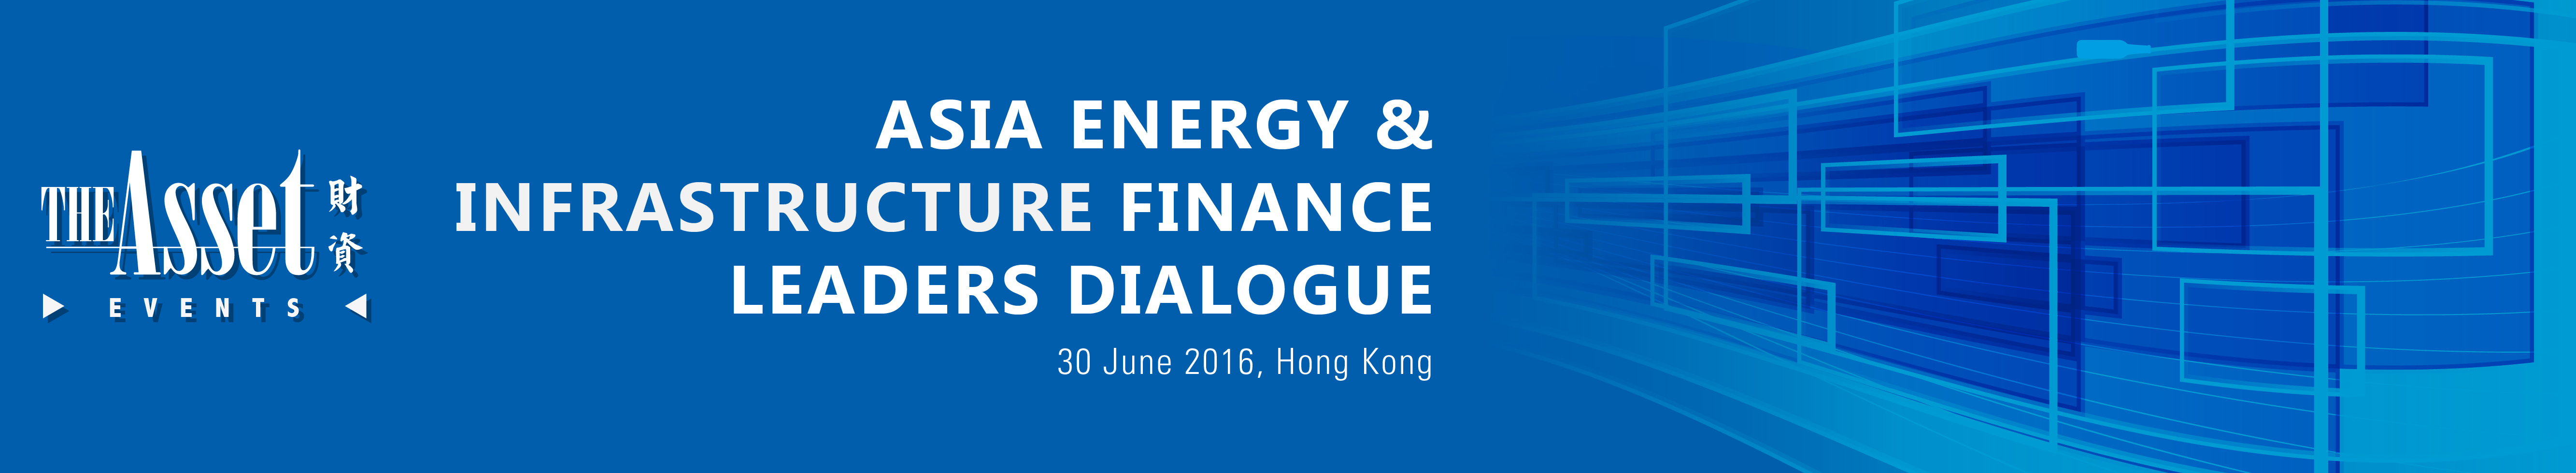 Asia Energy & Infrastructure Finance Leaders Dialogue